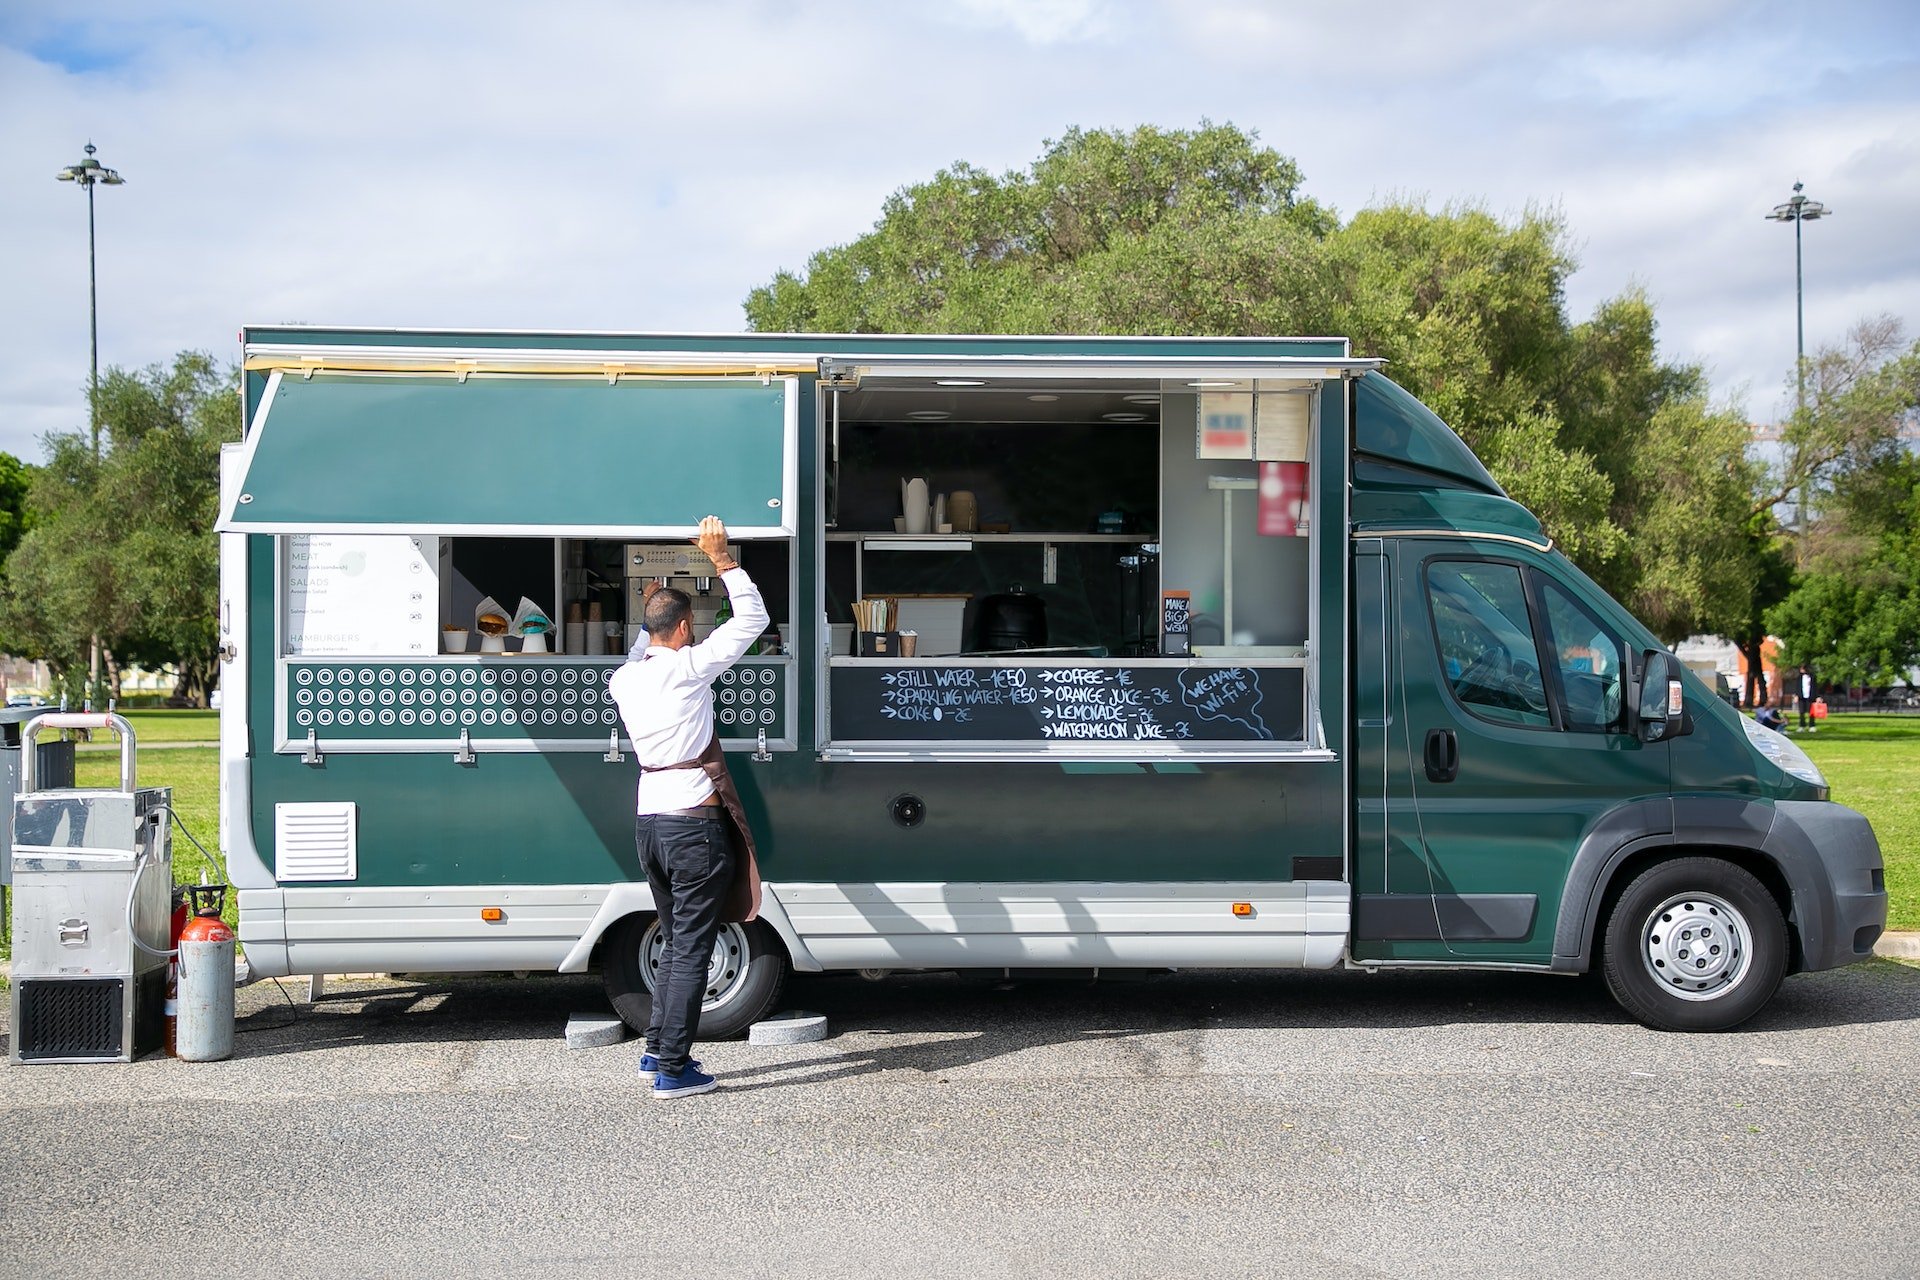 How to design and build a food truck or food trailer?